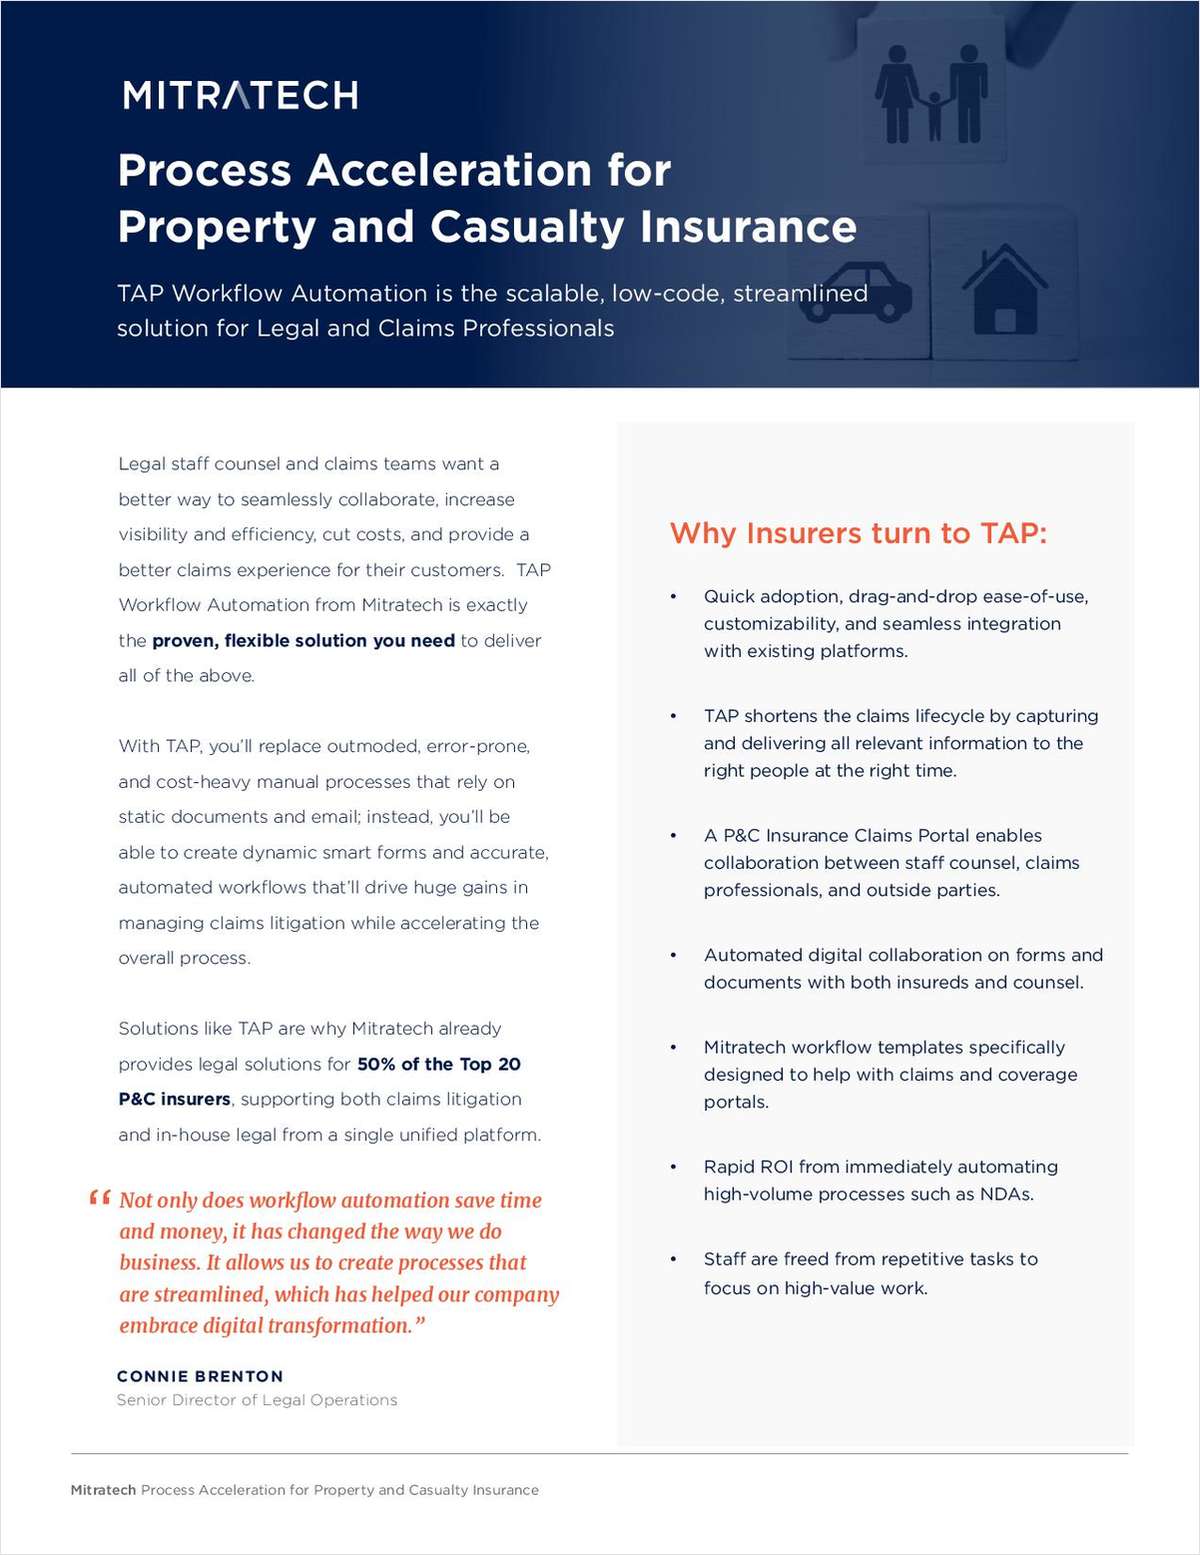 Process Acceleration for Property and Casualty Insurance